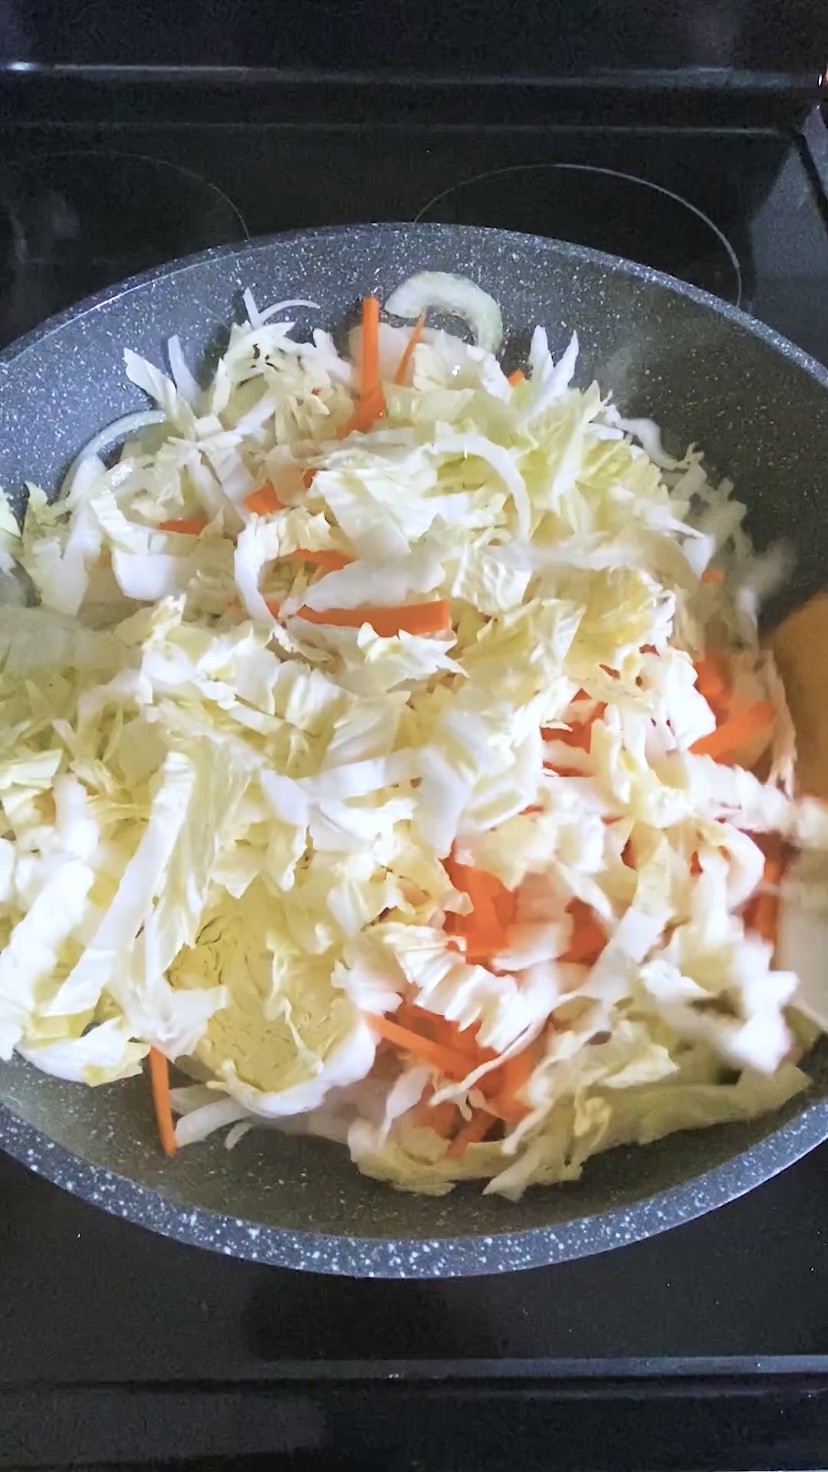 Cabbage is cooked in a large skillet.